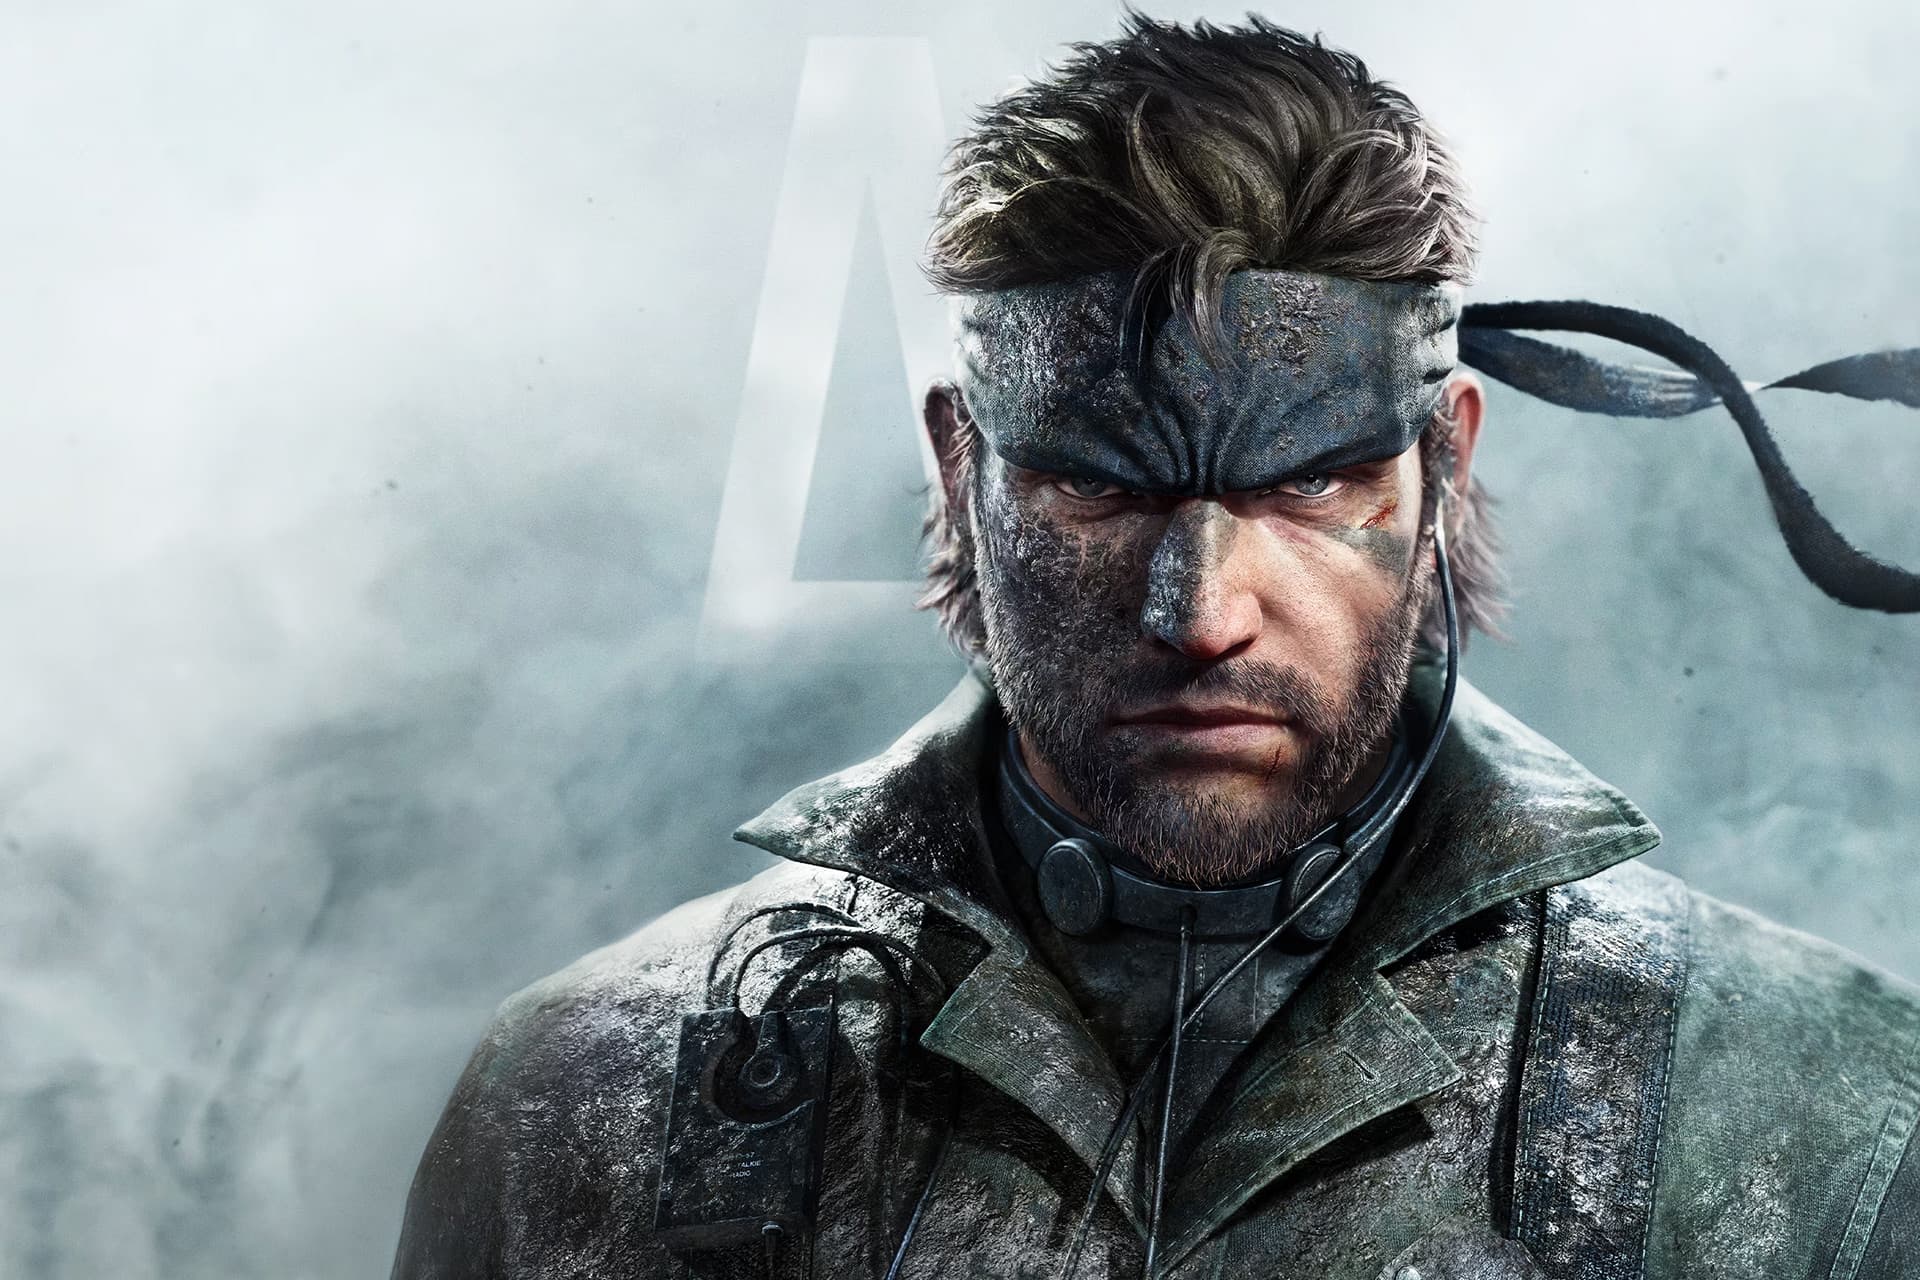 metal gearsolid delta snake eater 65bb9079381b5915be4f0d2a